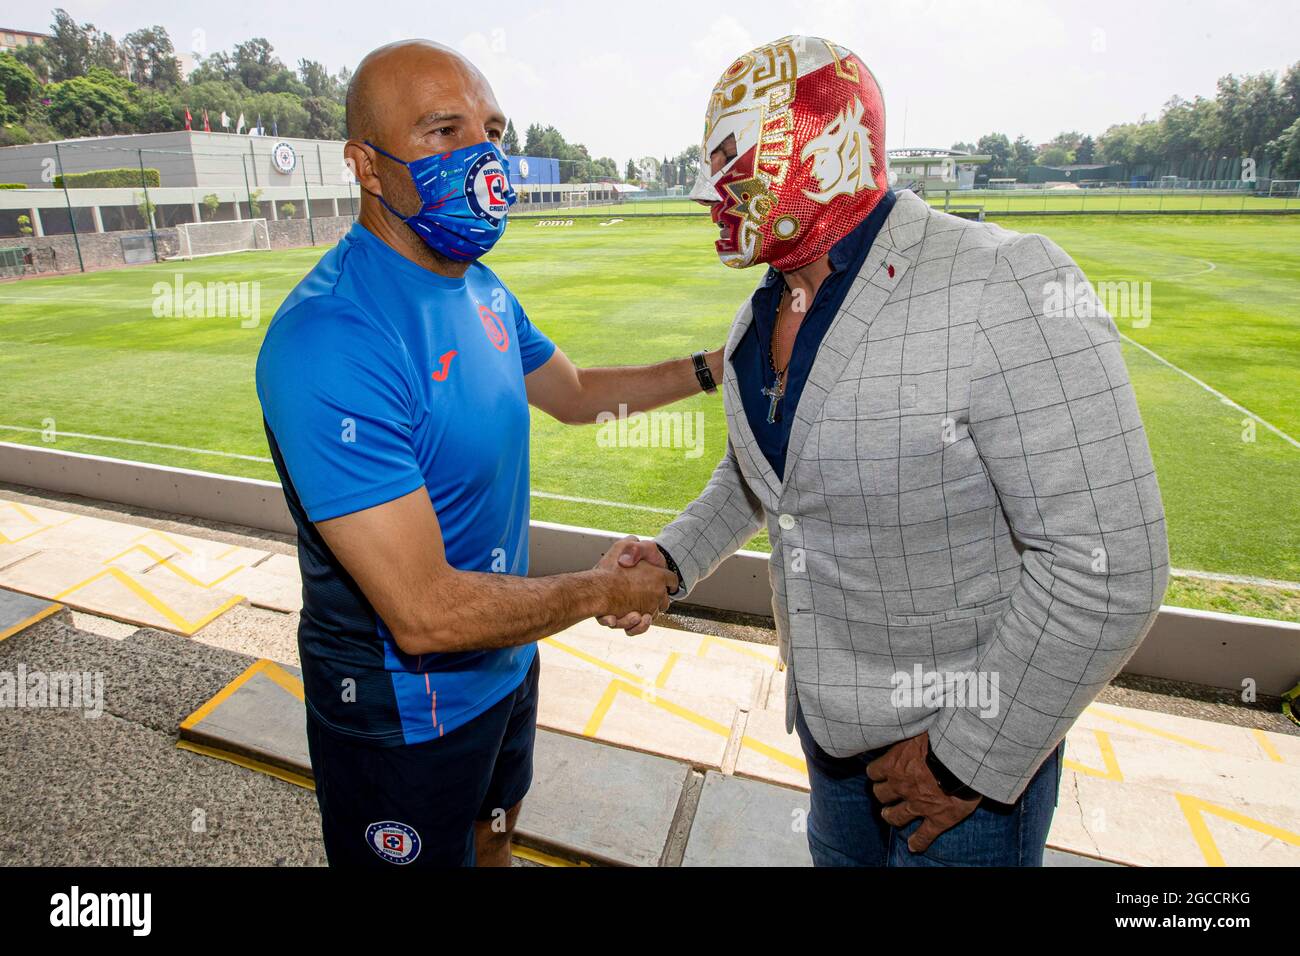 MEXICO CITY, MEXICO - AUGUST 4: Wrestler Dr Wagner meets with Oscar Perez at press conference at La Noria, high performance center of the Cruz Azul football team on August 4, 2021 in Mexico City, Mexico. Credit: Ricardo Flores/Eyepix Group/The Photo Access Stock Photo